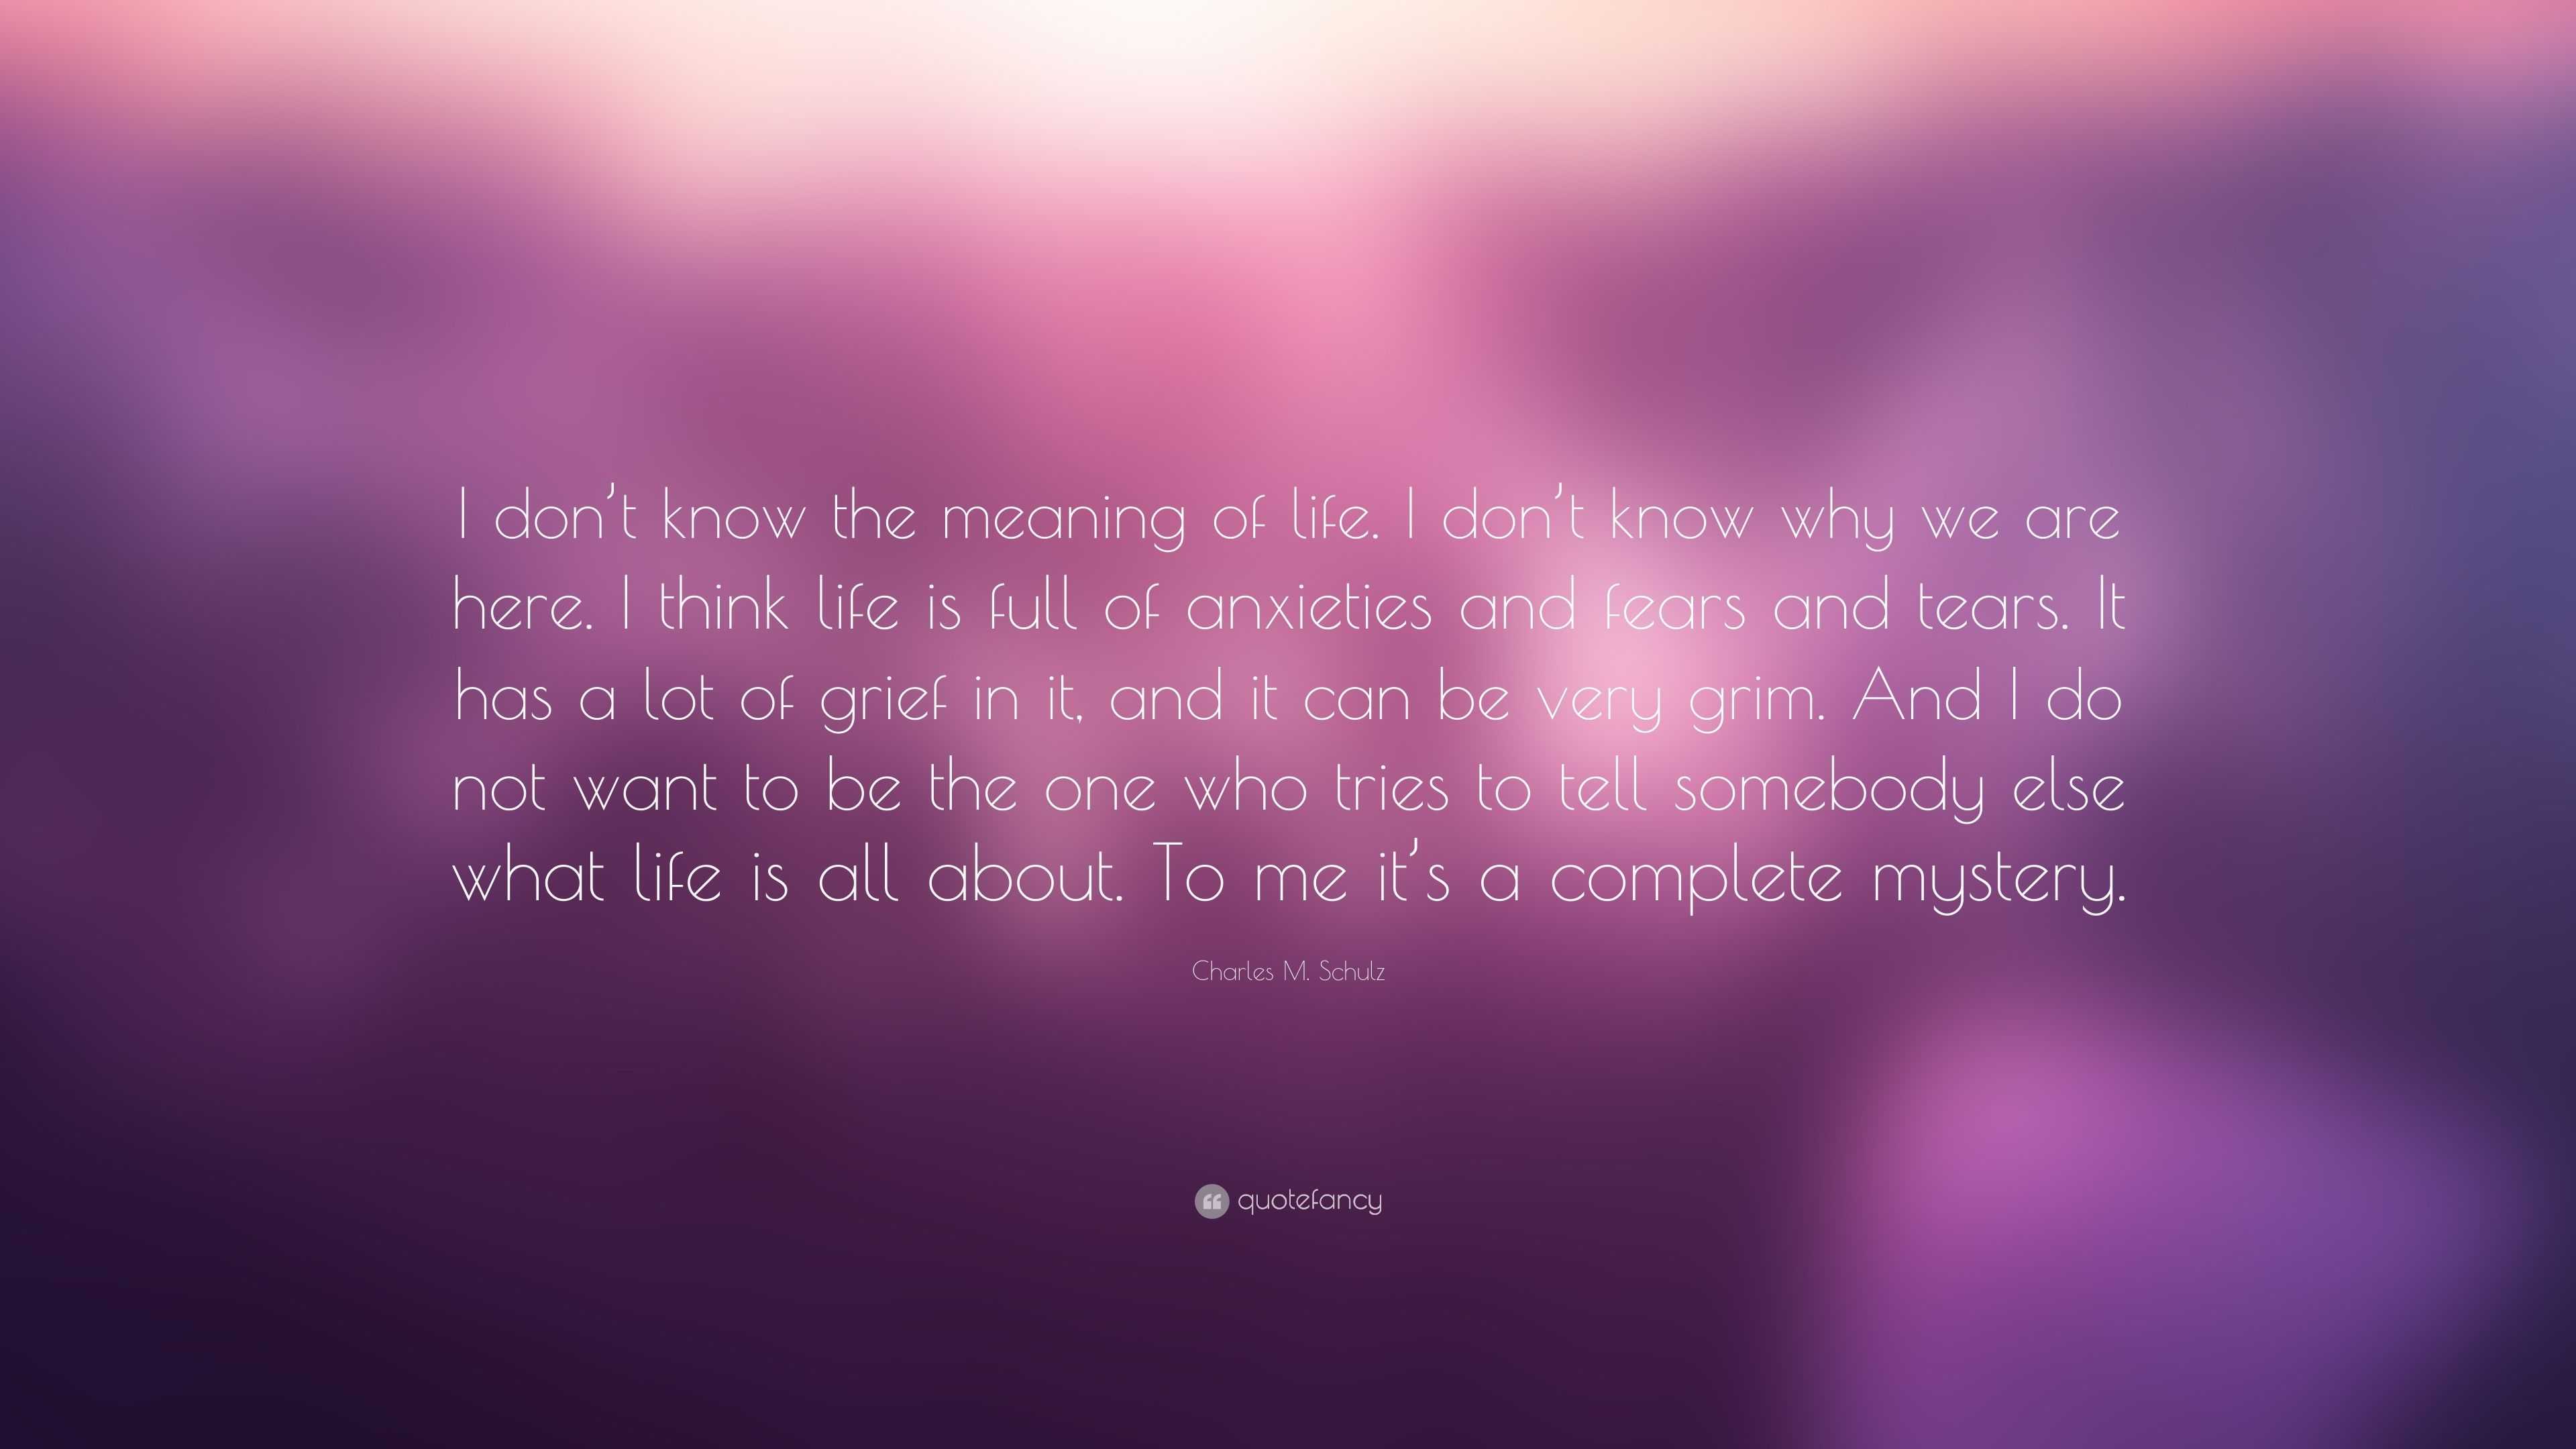 Charles M. Schulz Quote: “I don’t know the meaning of life. I don’t ...